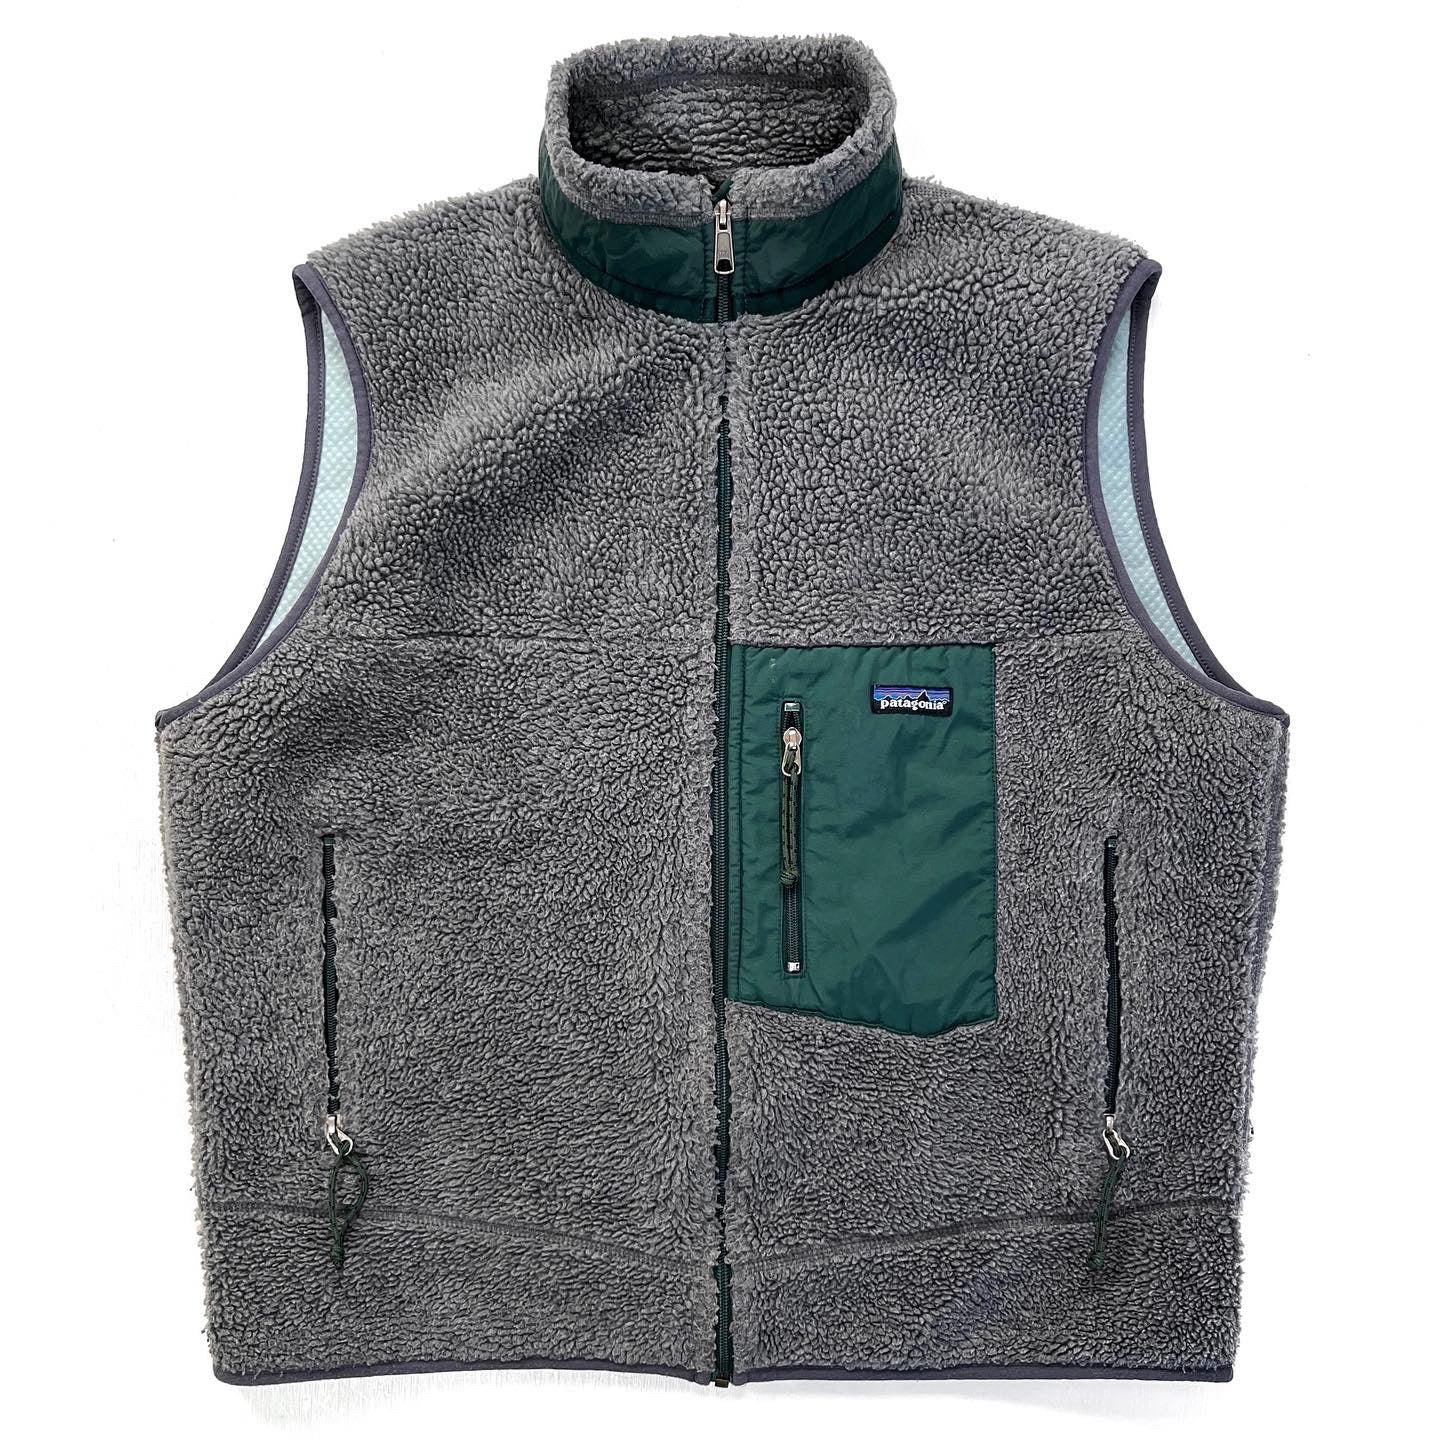 1999 Patagonia Made In The U.S.A. Retro-X Vest, Charcoal & Hunter (XL)